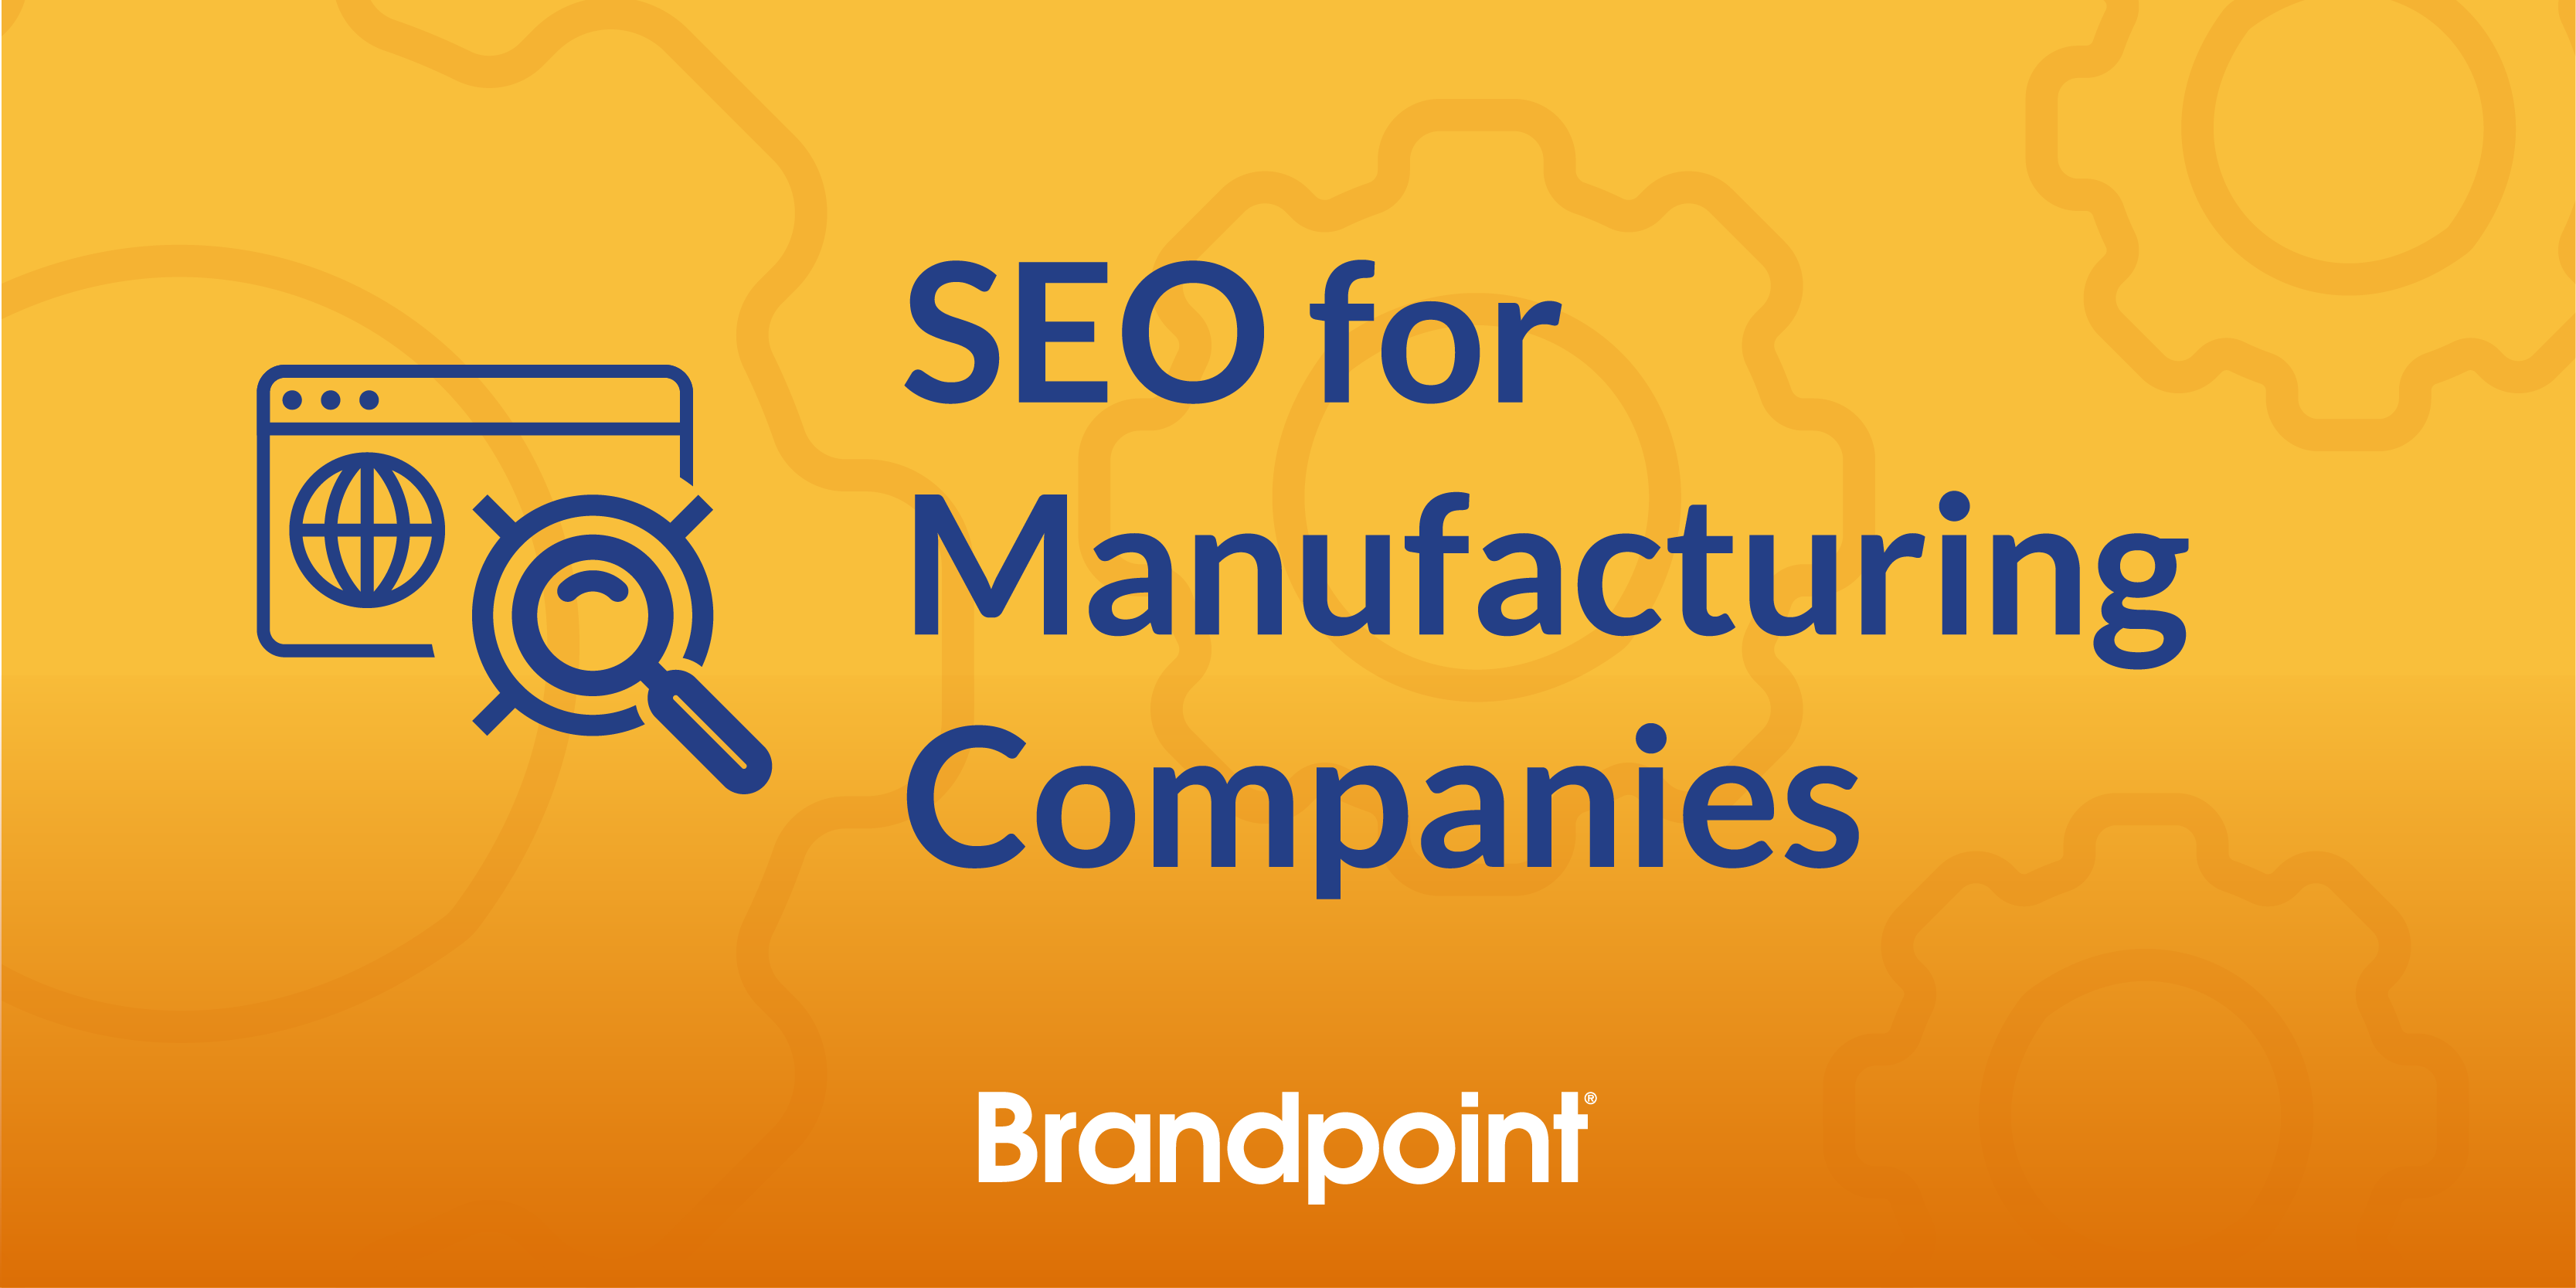 SEO for Manufacturing Companies blog header image, blue text on yellow background with icon of computer folder and a magnifying glass